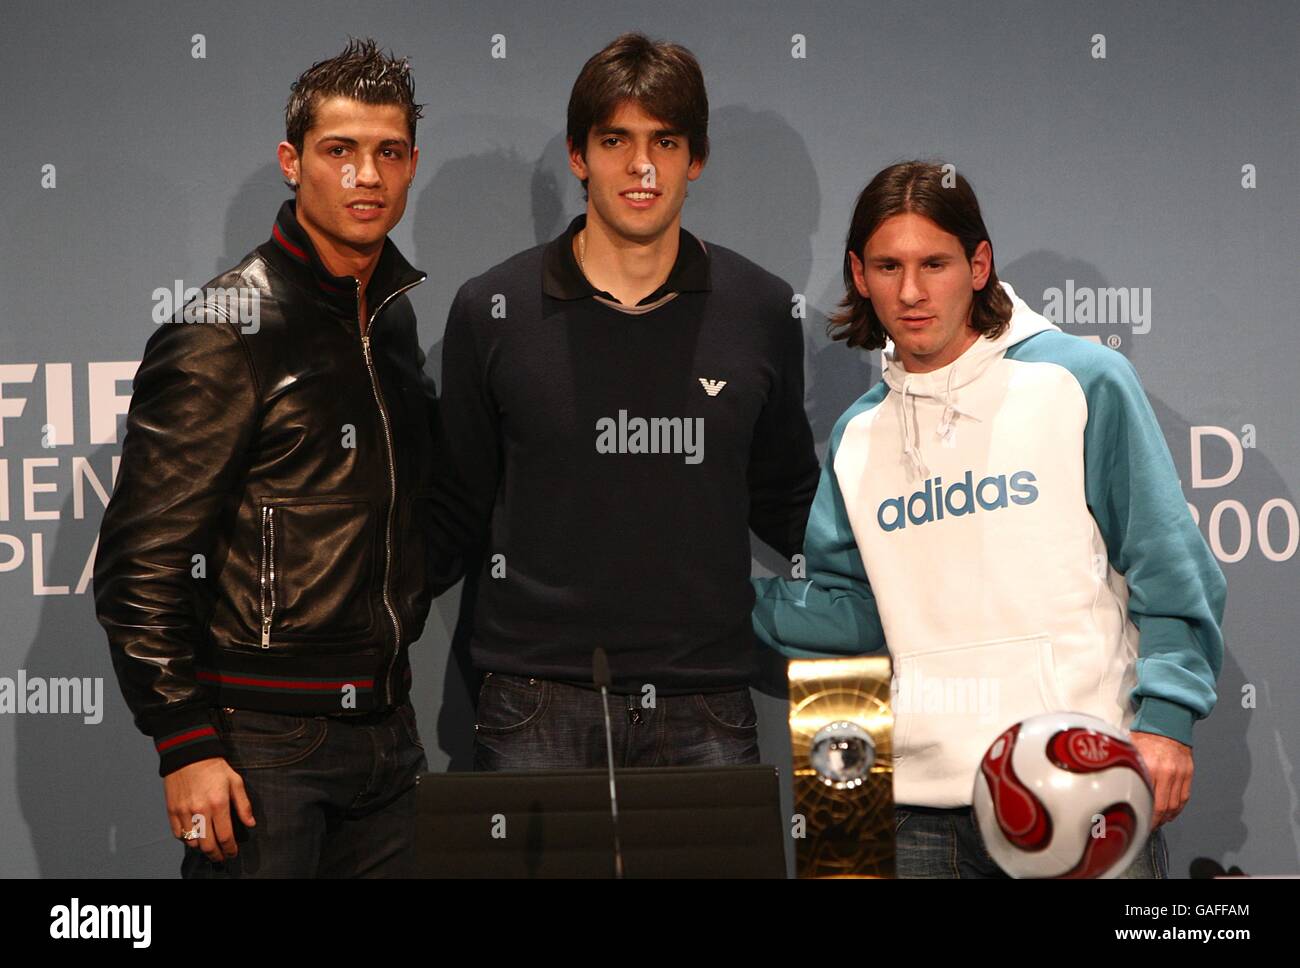 Manchester United's Cristiano Ronaldo, AC Milan's Kaka and Barcelona's Lionel Messi at the FIFA World Player Gala Stock Photo